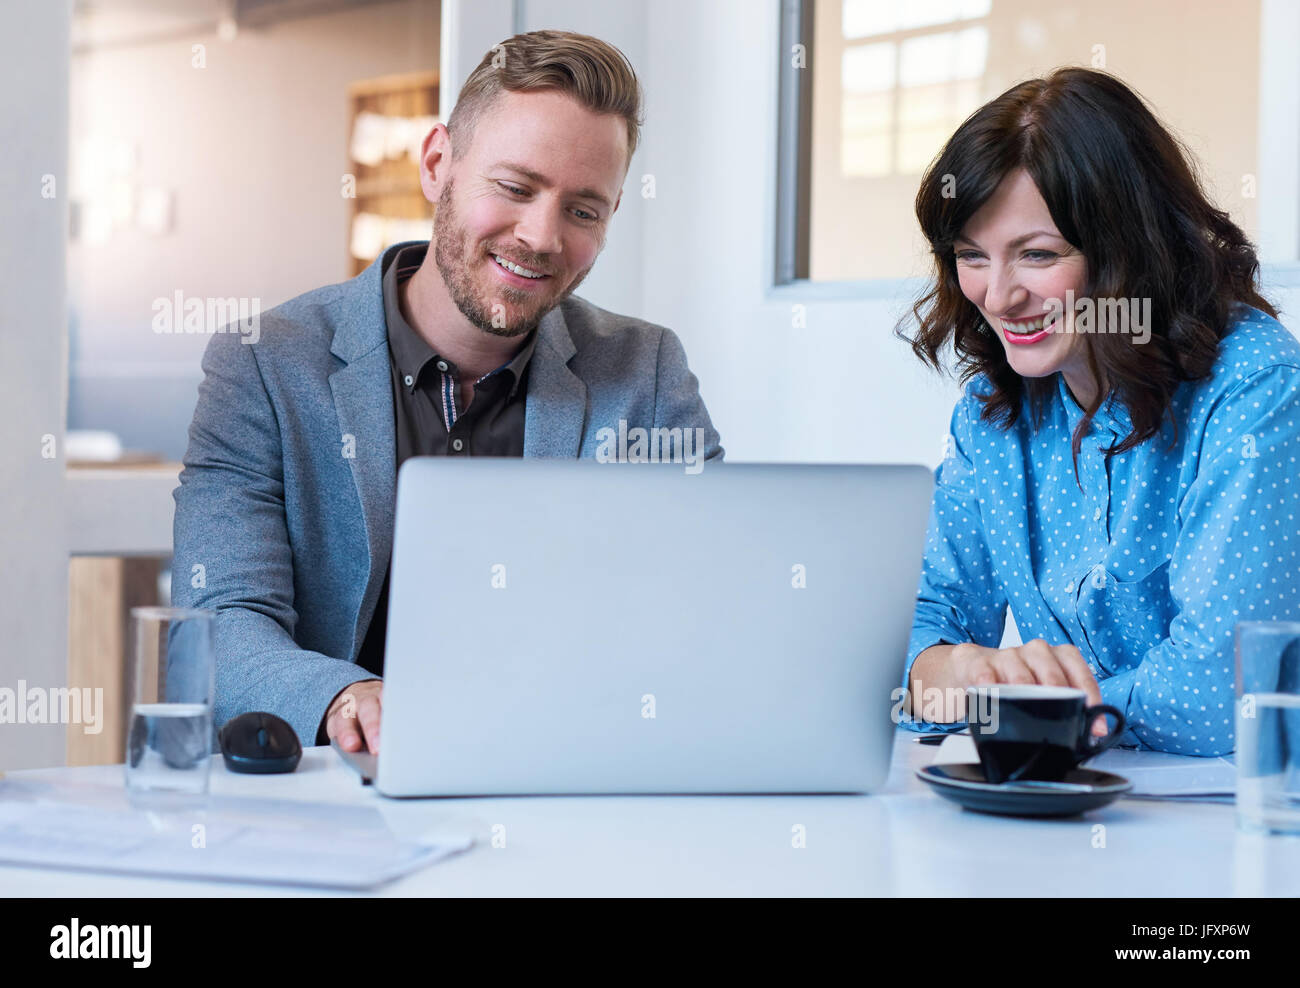 Two smiling young coworkers using a laptop in an office Stock Photo